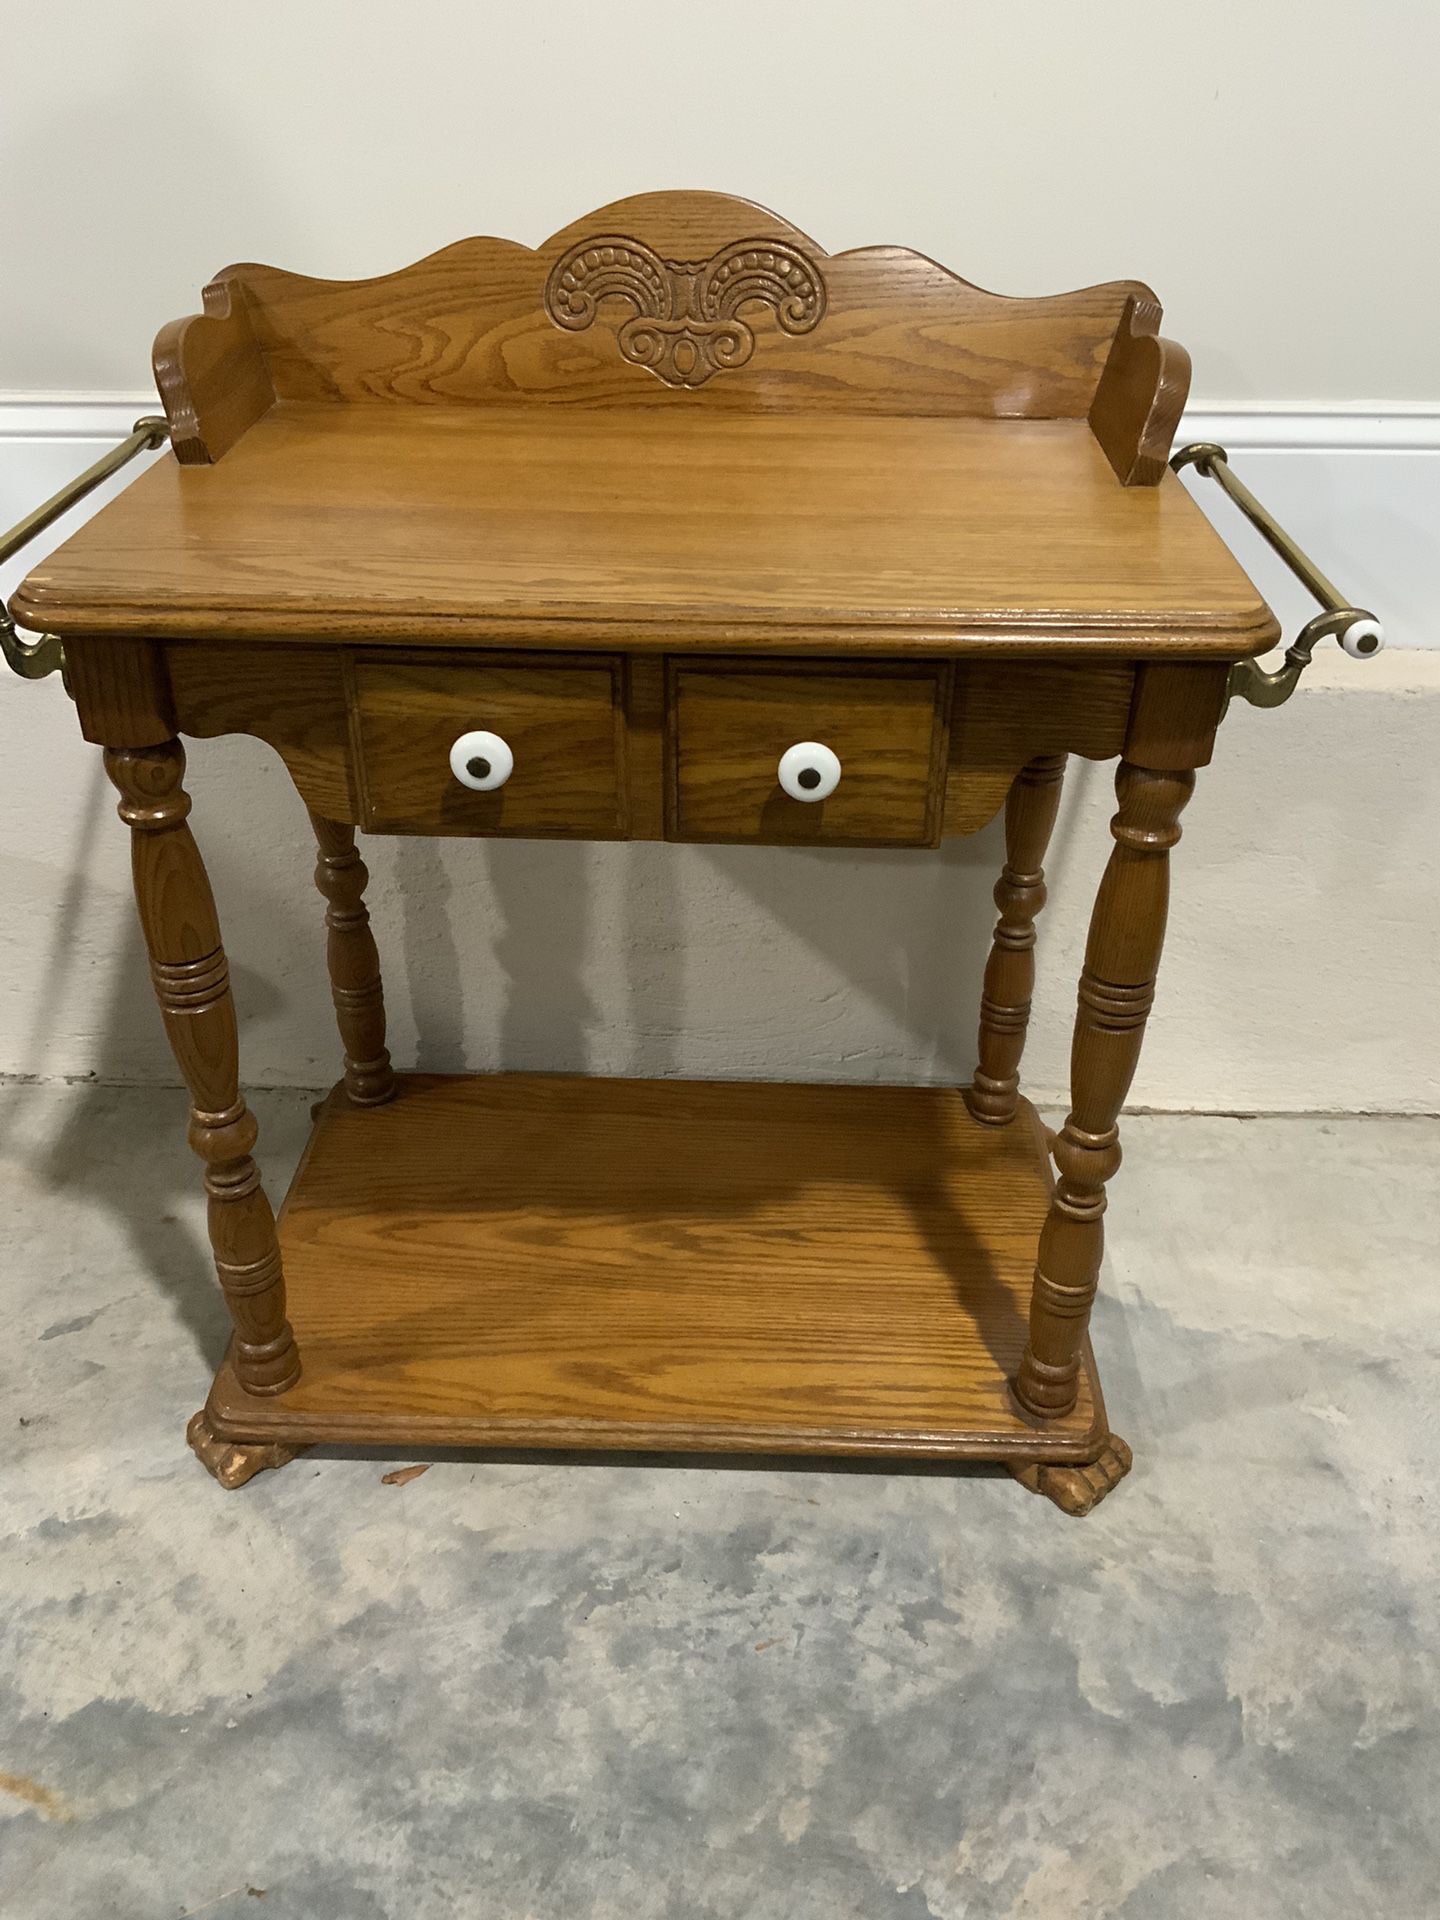 Vintage washstand table.  Solid oak. Well made. Heavy. 